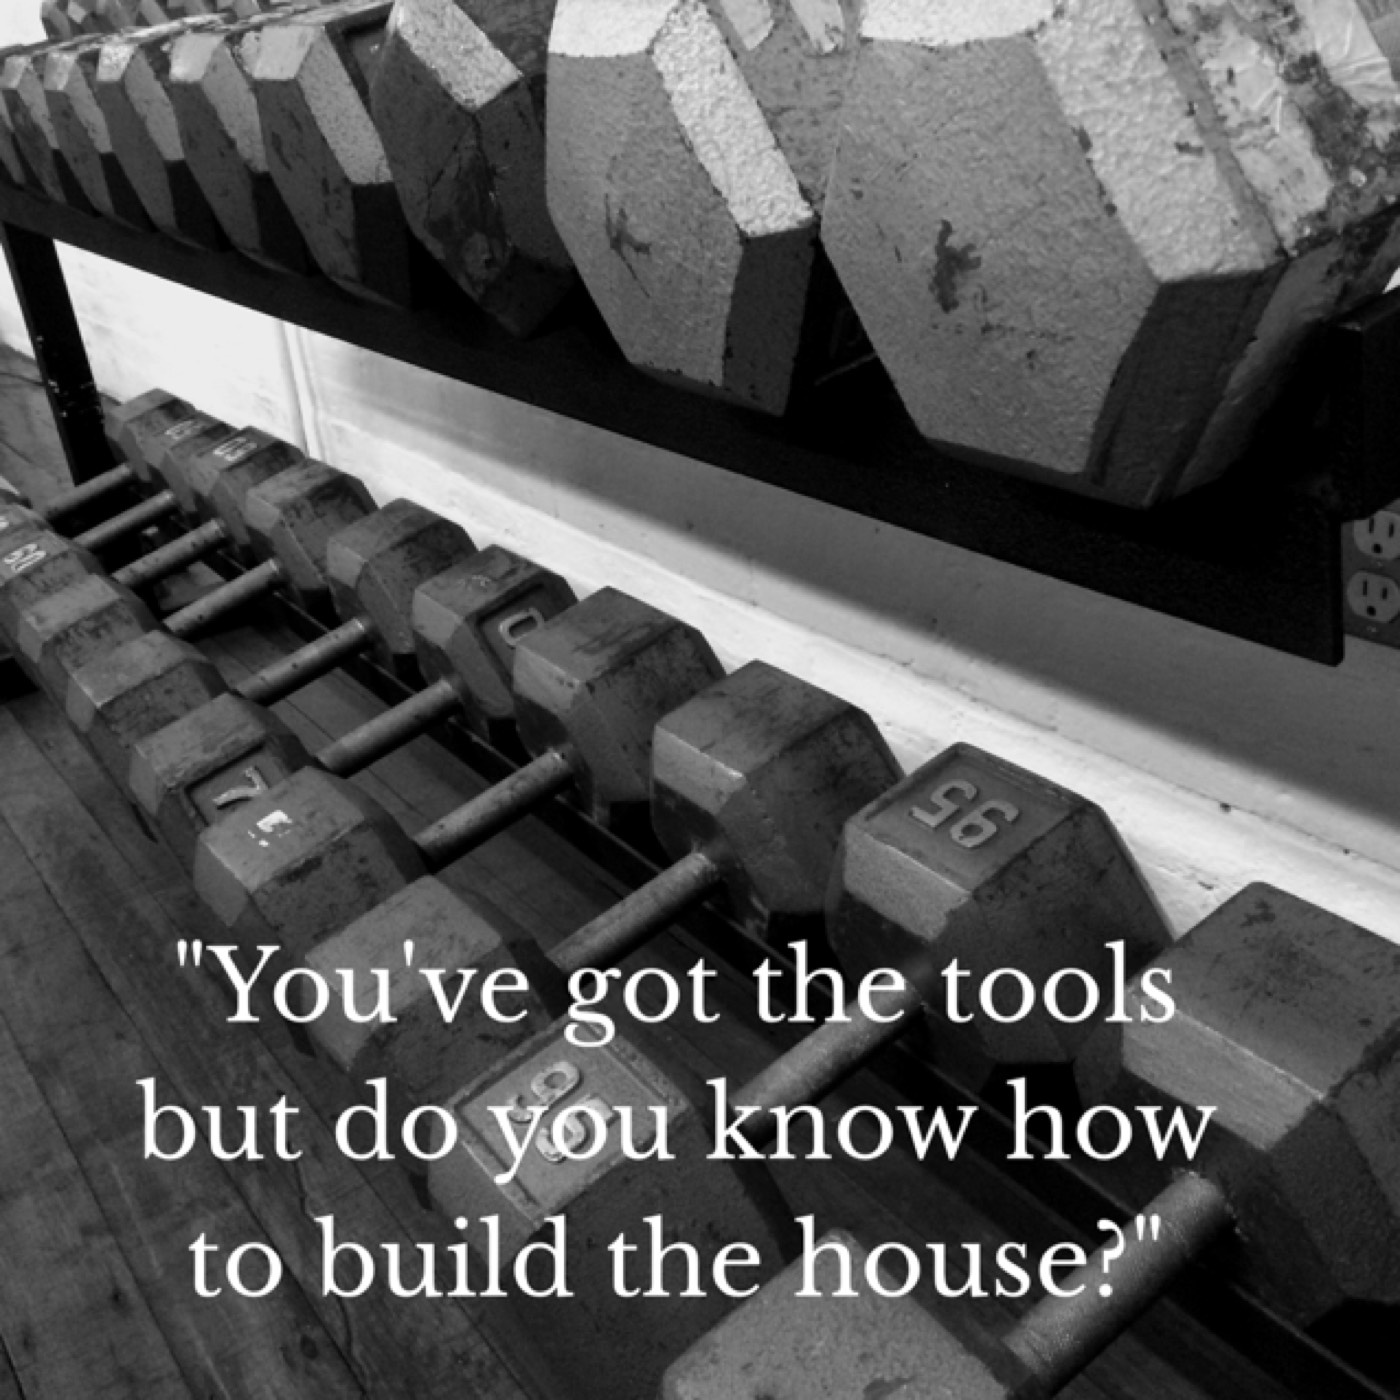 Episode 69- You've got the tools but can you build a house?